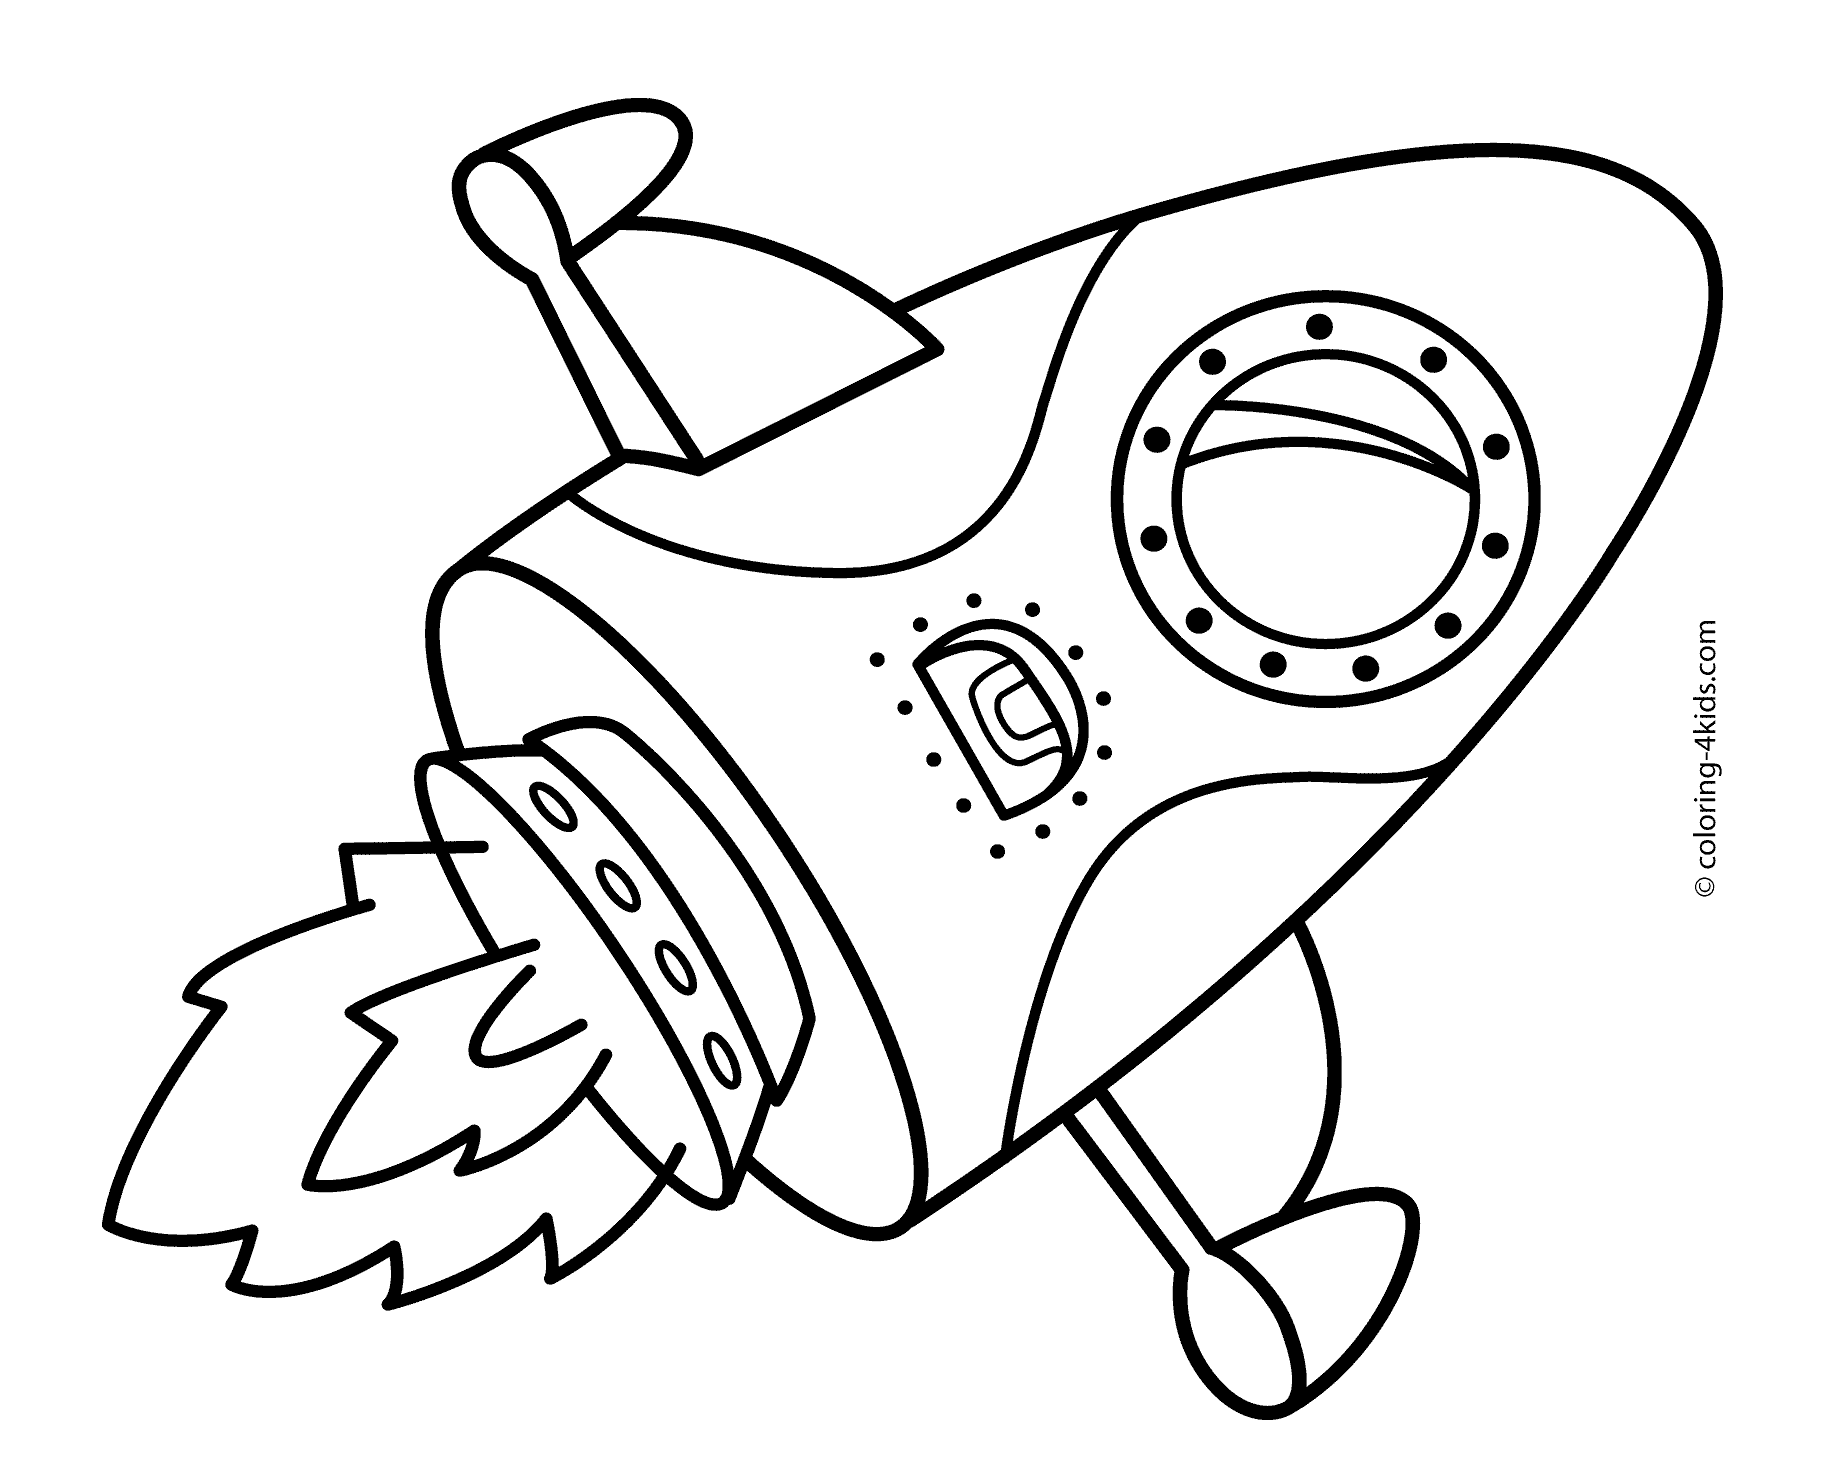 Cool Rocket coloring pages for kids, printable free | coloing-